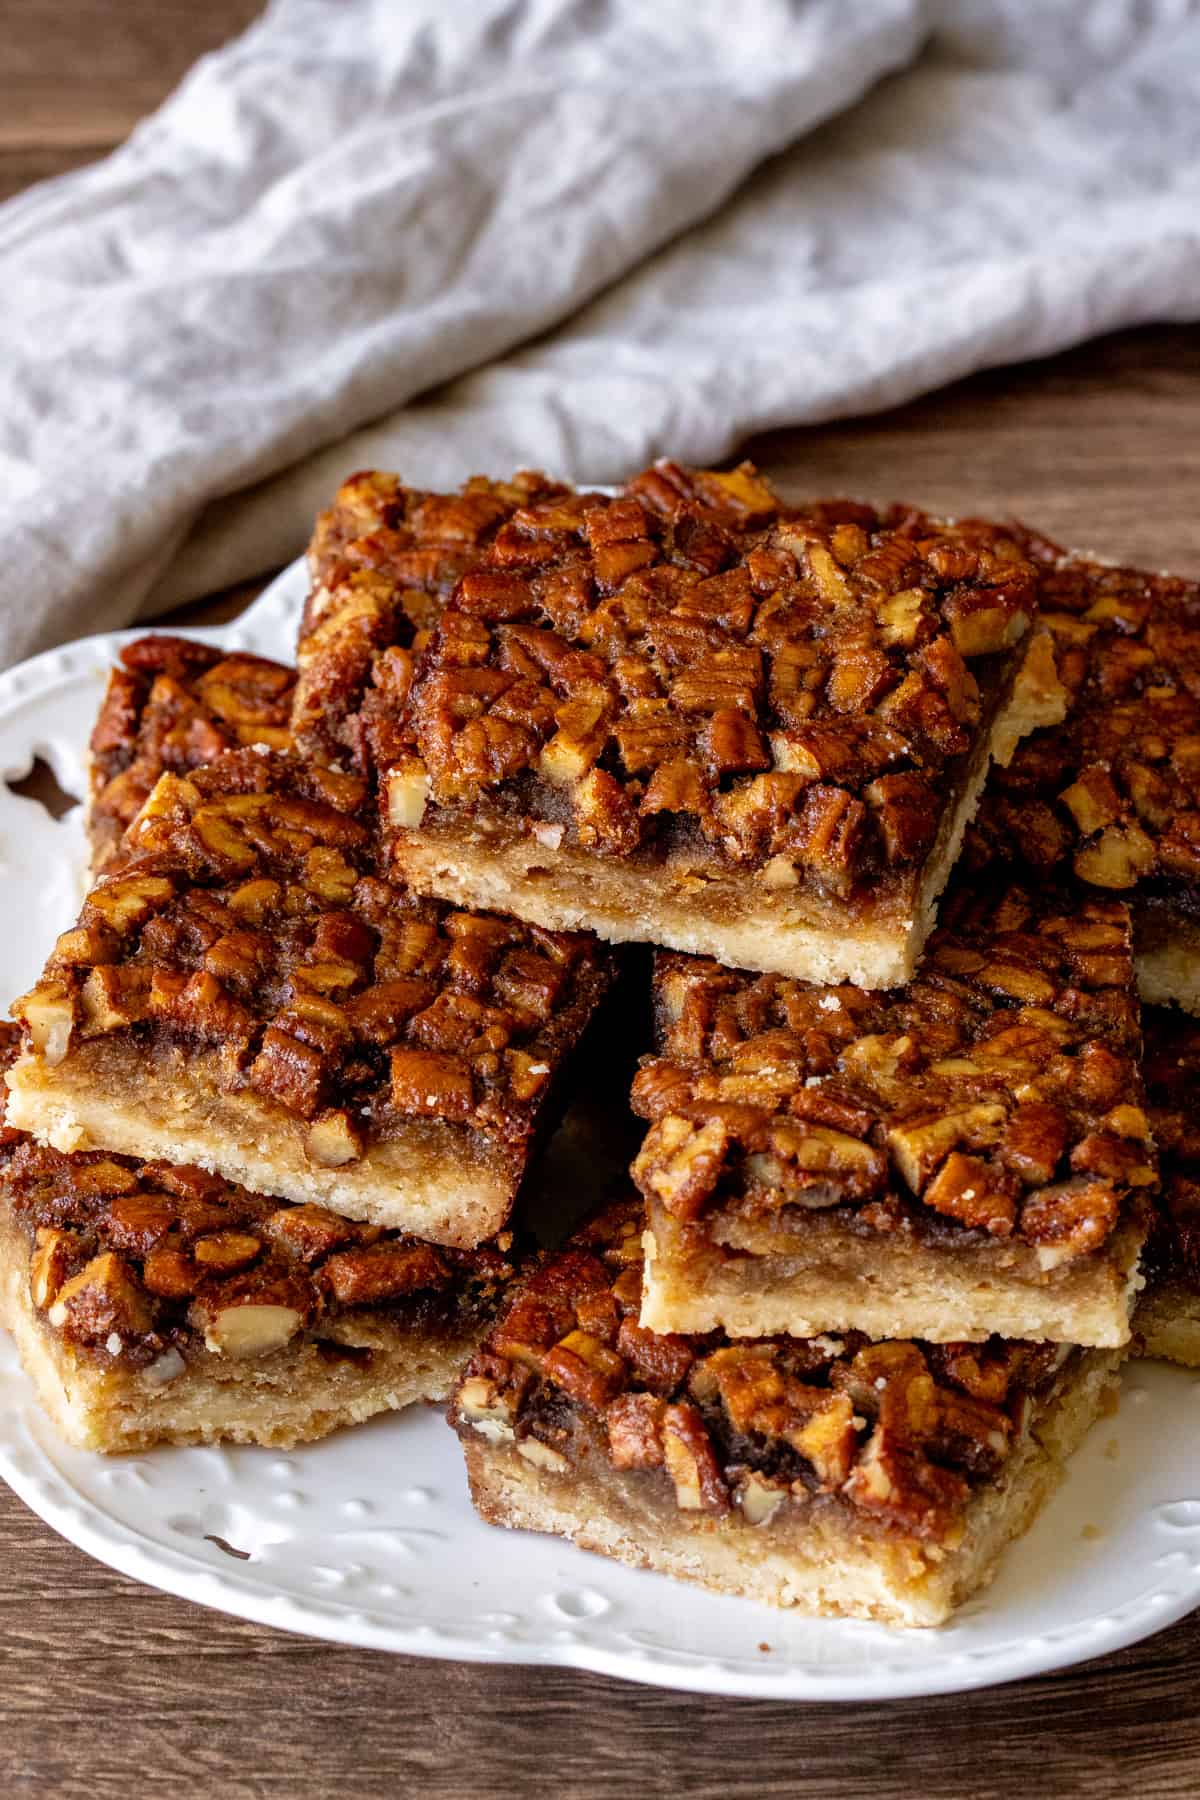 Plate of maple pecan shortbread bars, with bars stacked on top of each other